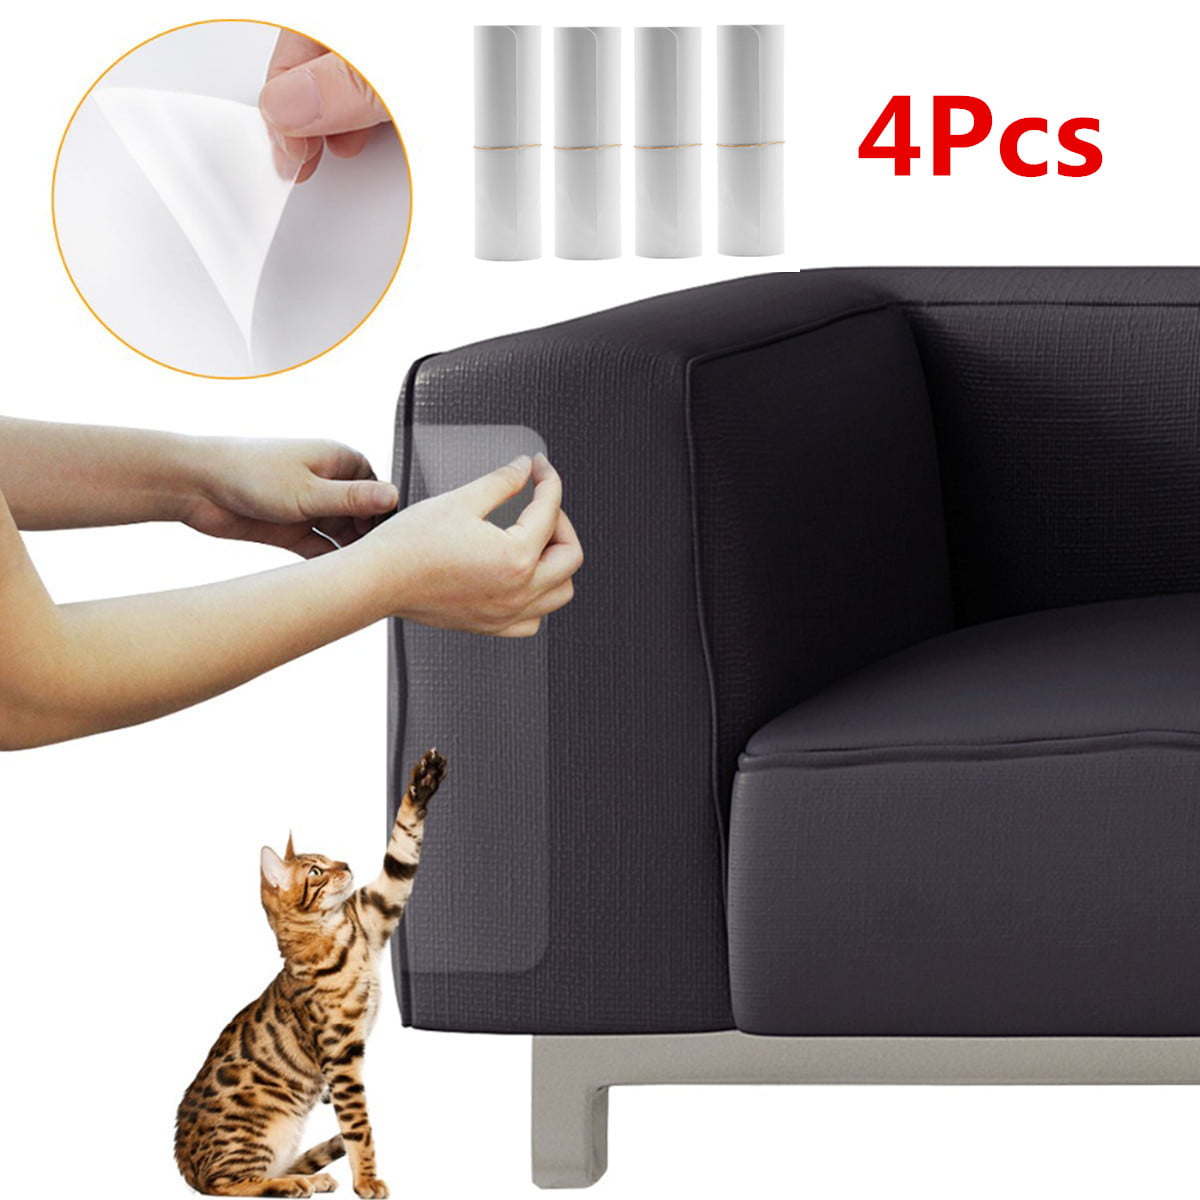 4pcs Anti Scratch Mattress Couch Protector For Cats Stop Pets